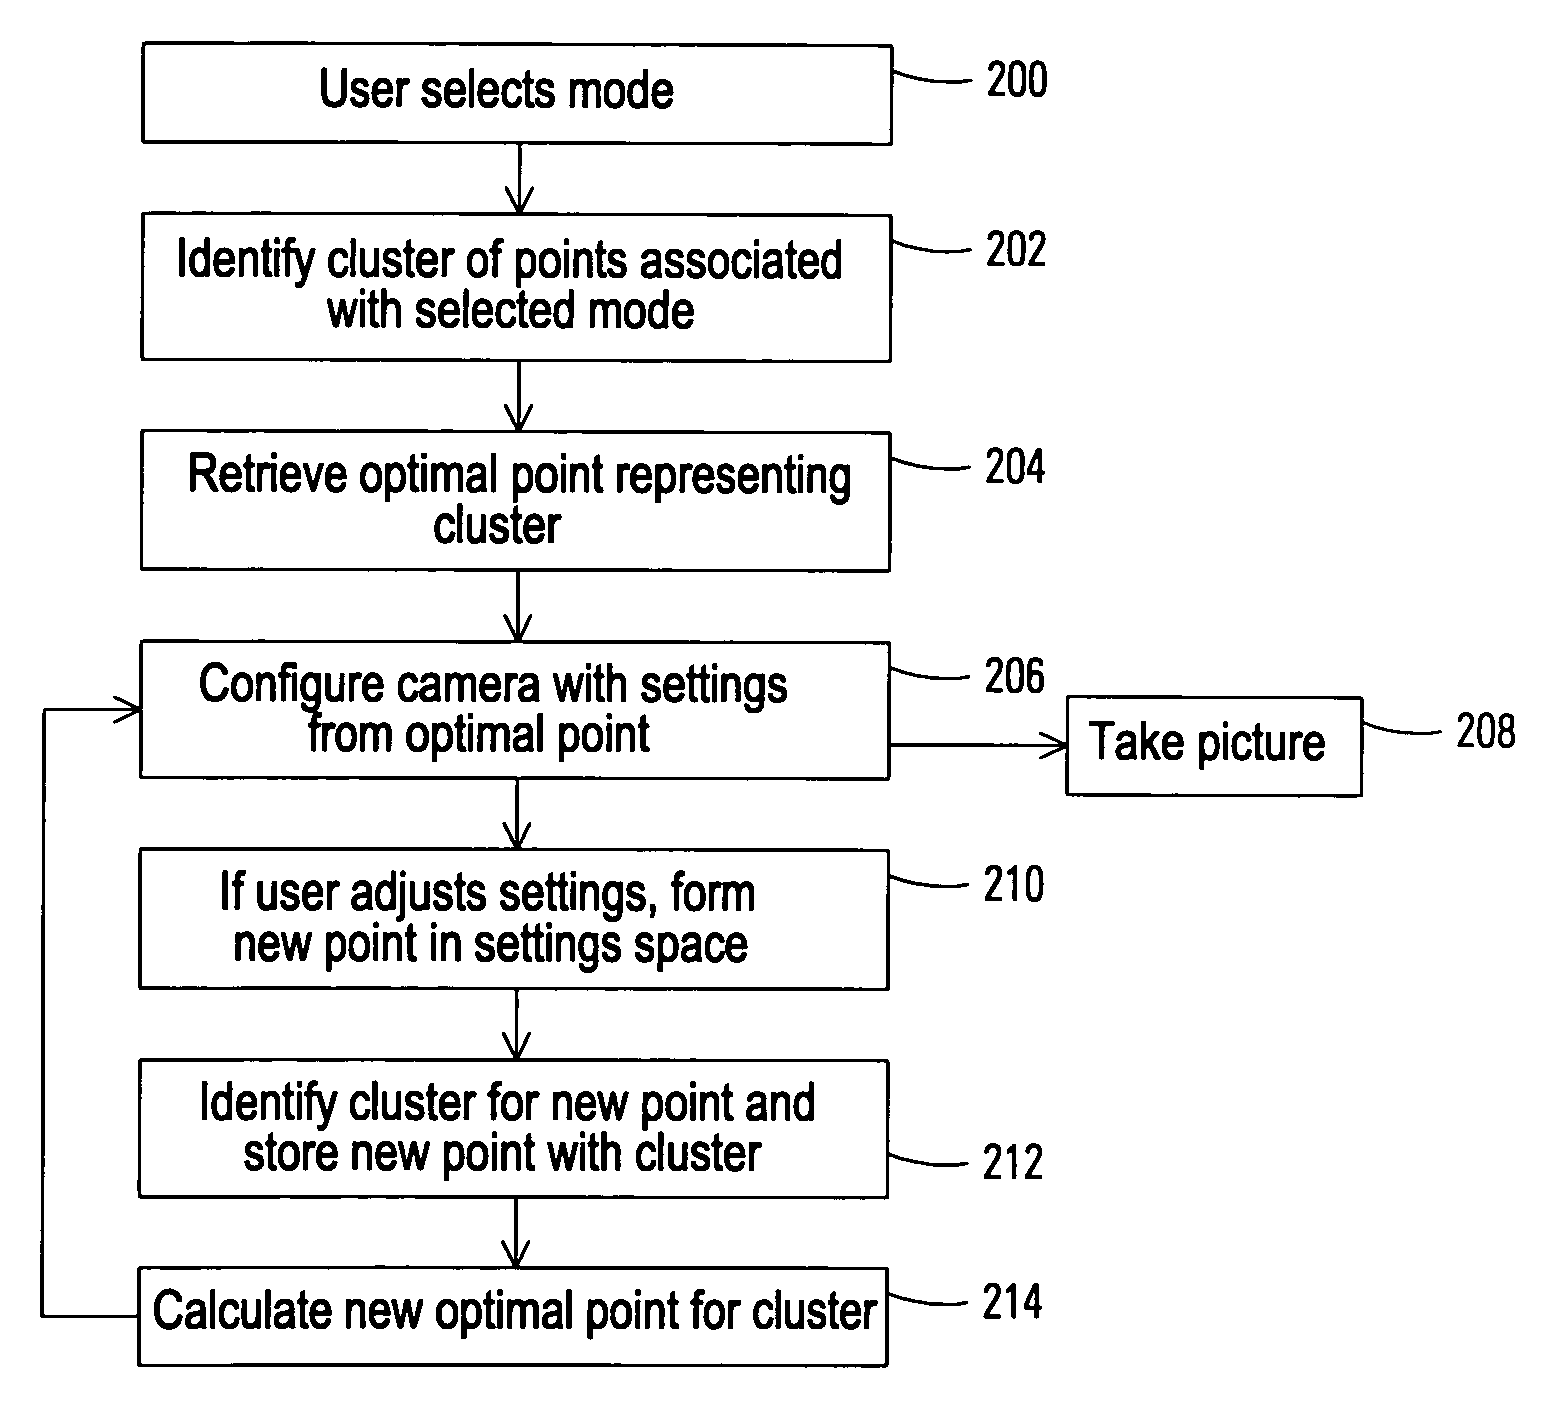 Adaptive and learning setting selection process with selectable learning modes for imaging device